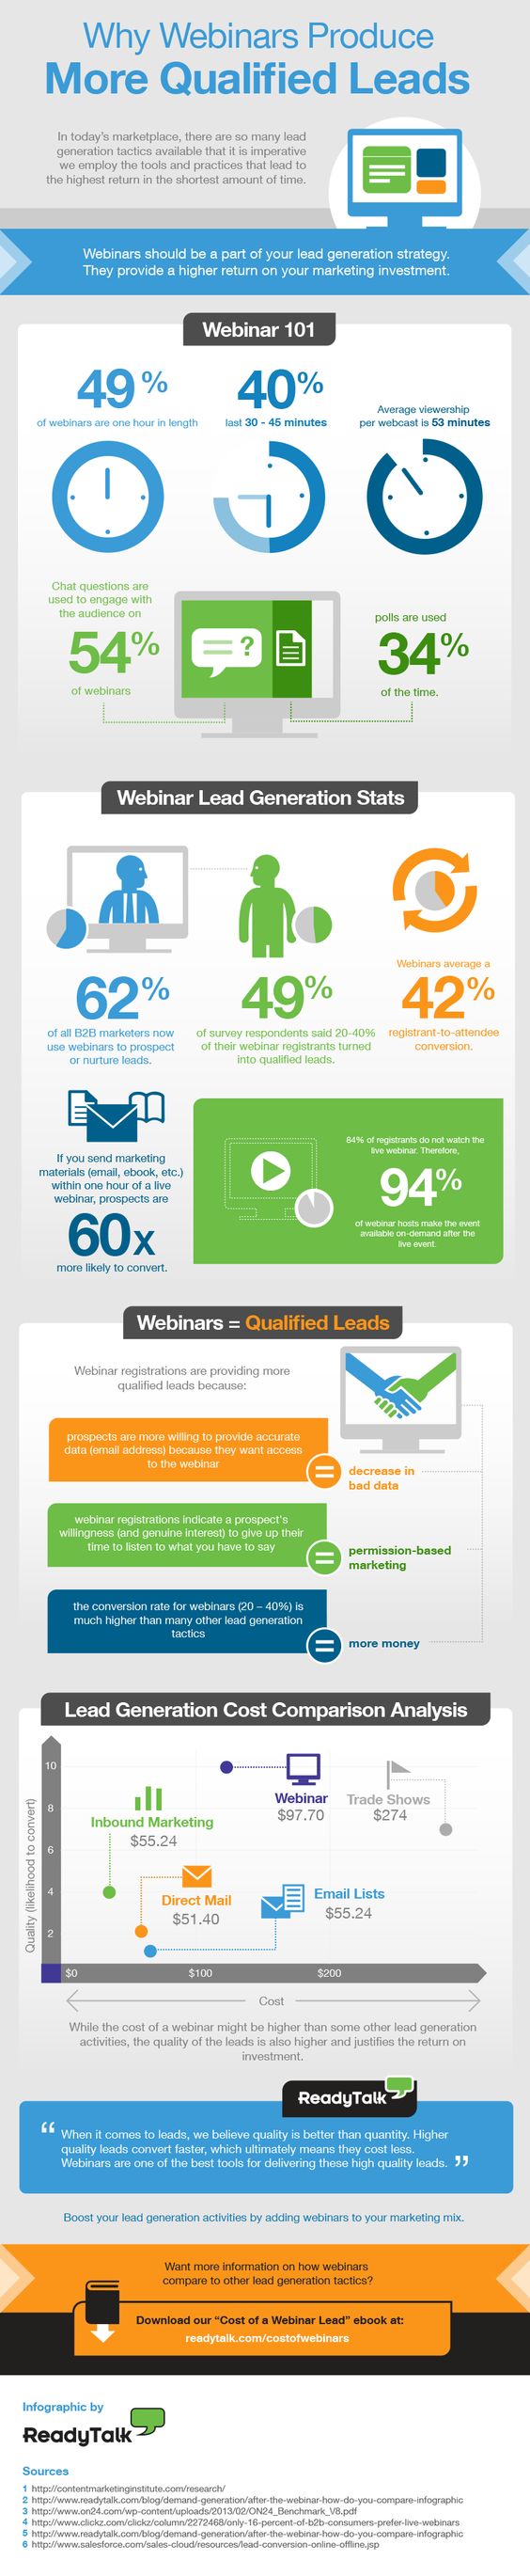 Why Webinars Produce More Qualified Leads Infographic